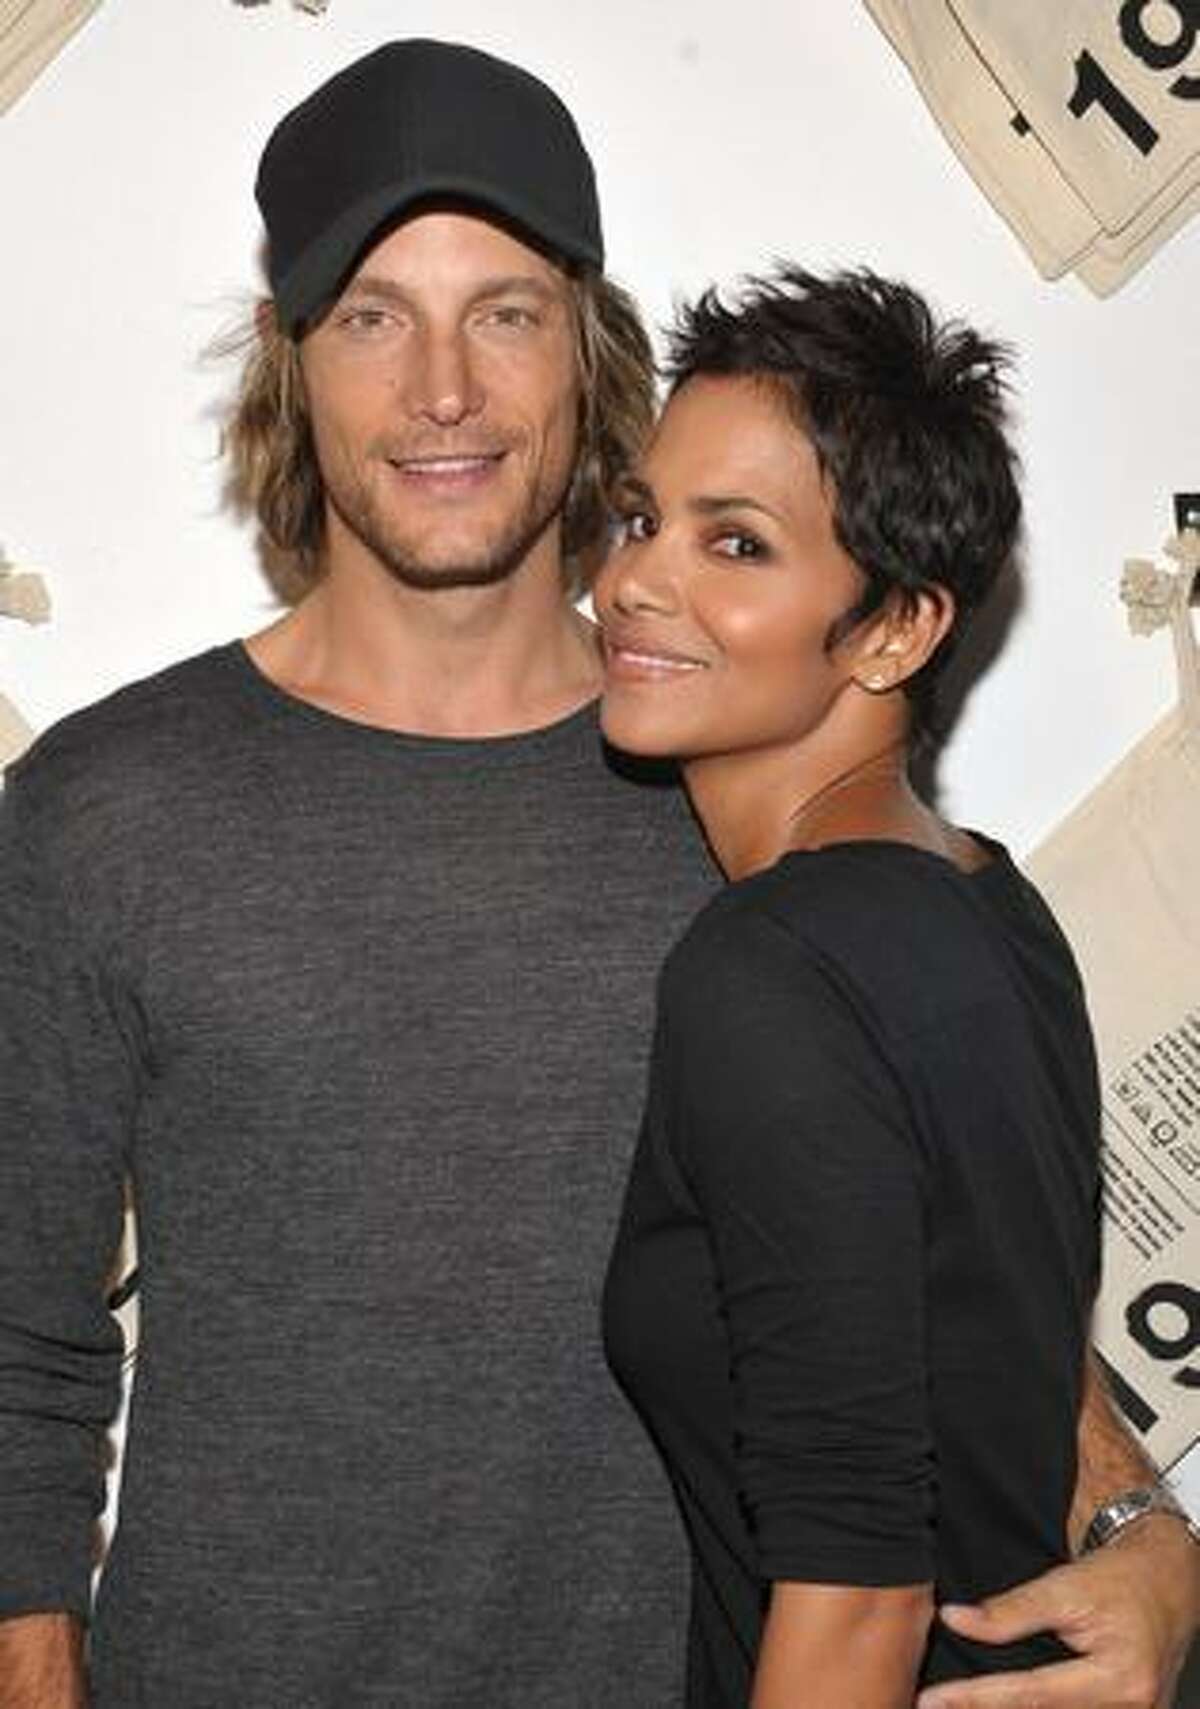 Actress Halle Berry (R) and Gabriel Aubry attend the launch event for Gap's 1969 Jean Shop on Robertson Blvd at their 1969 Jean Shop in West Hollywood, California.